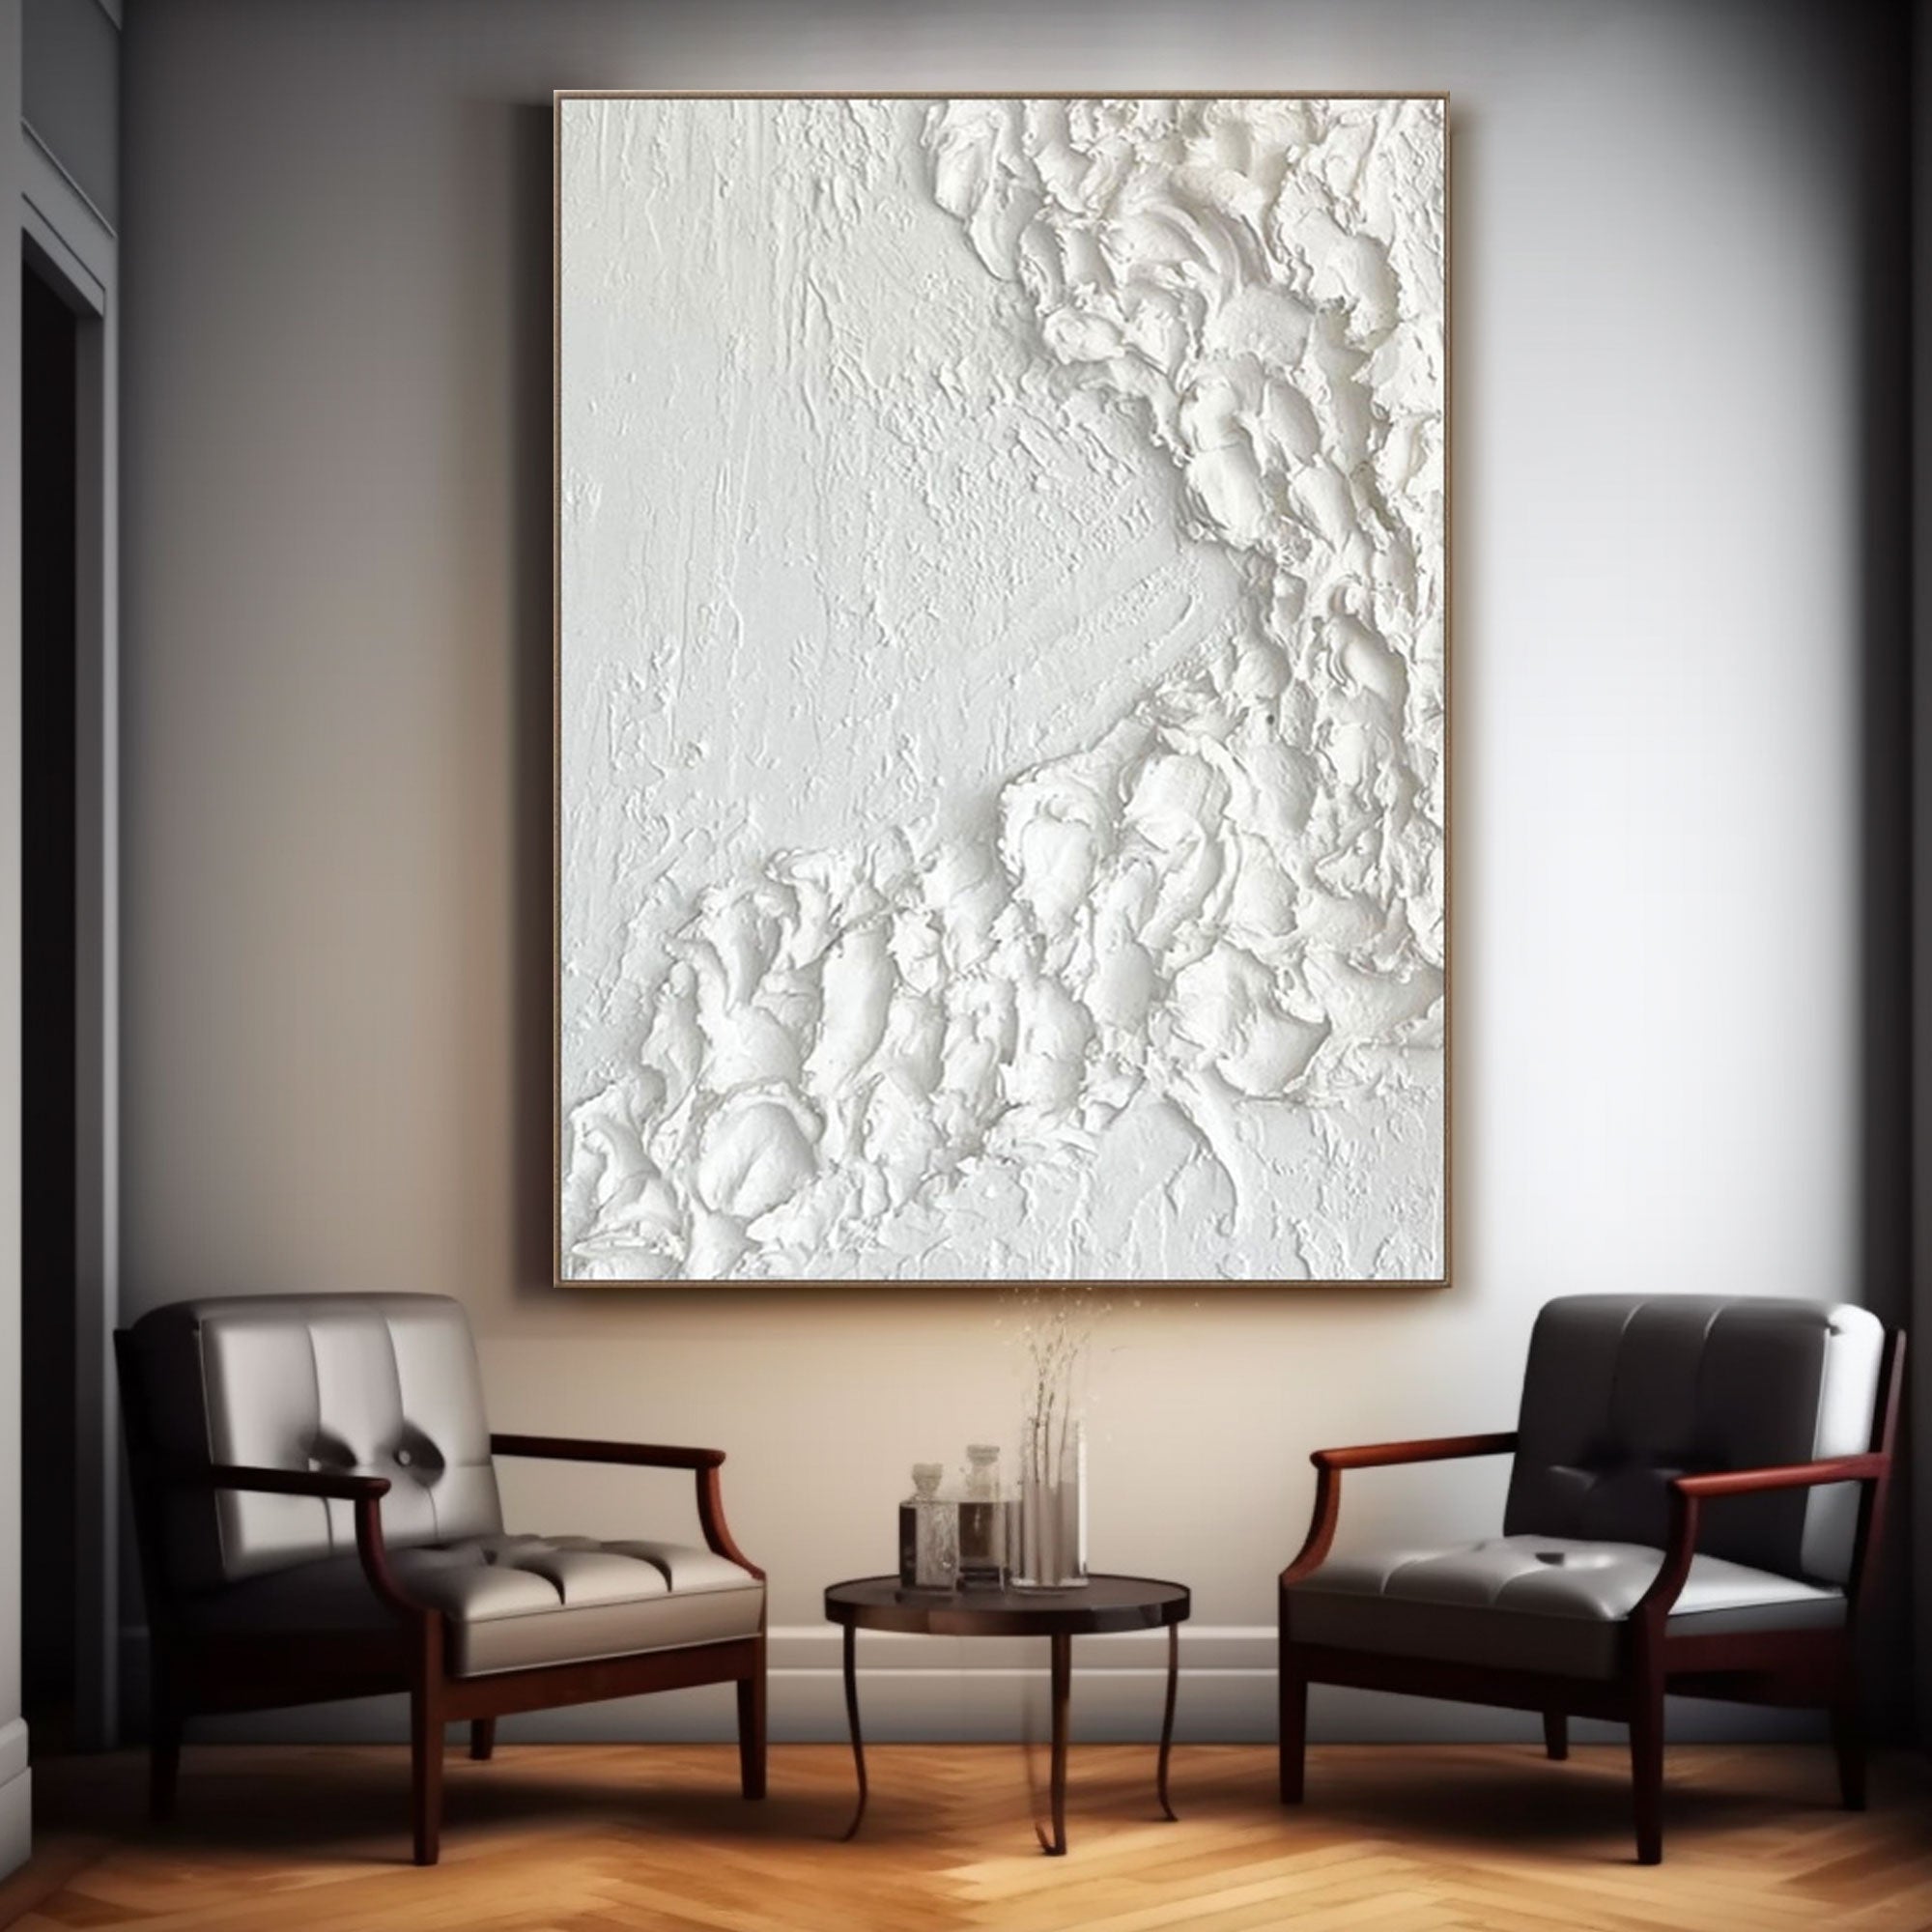 Minimalist White and Gray Painting "Winter's Embrace"